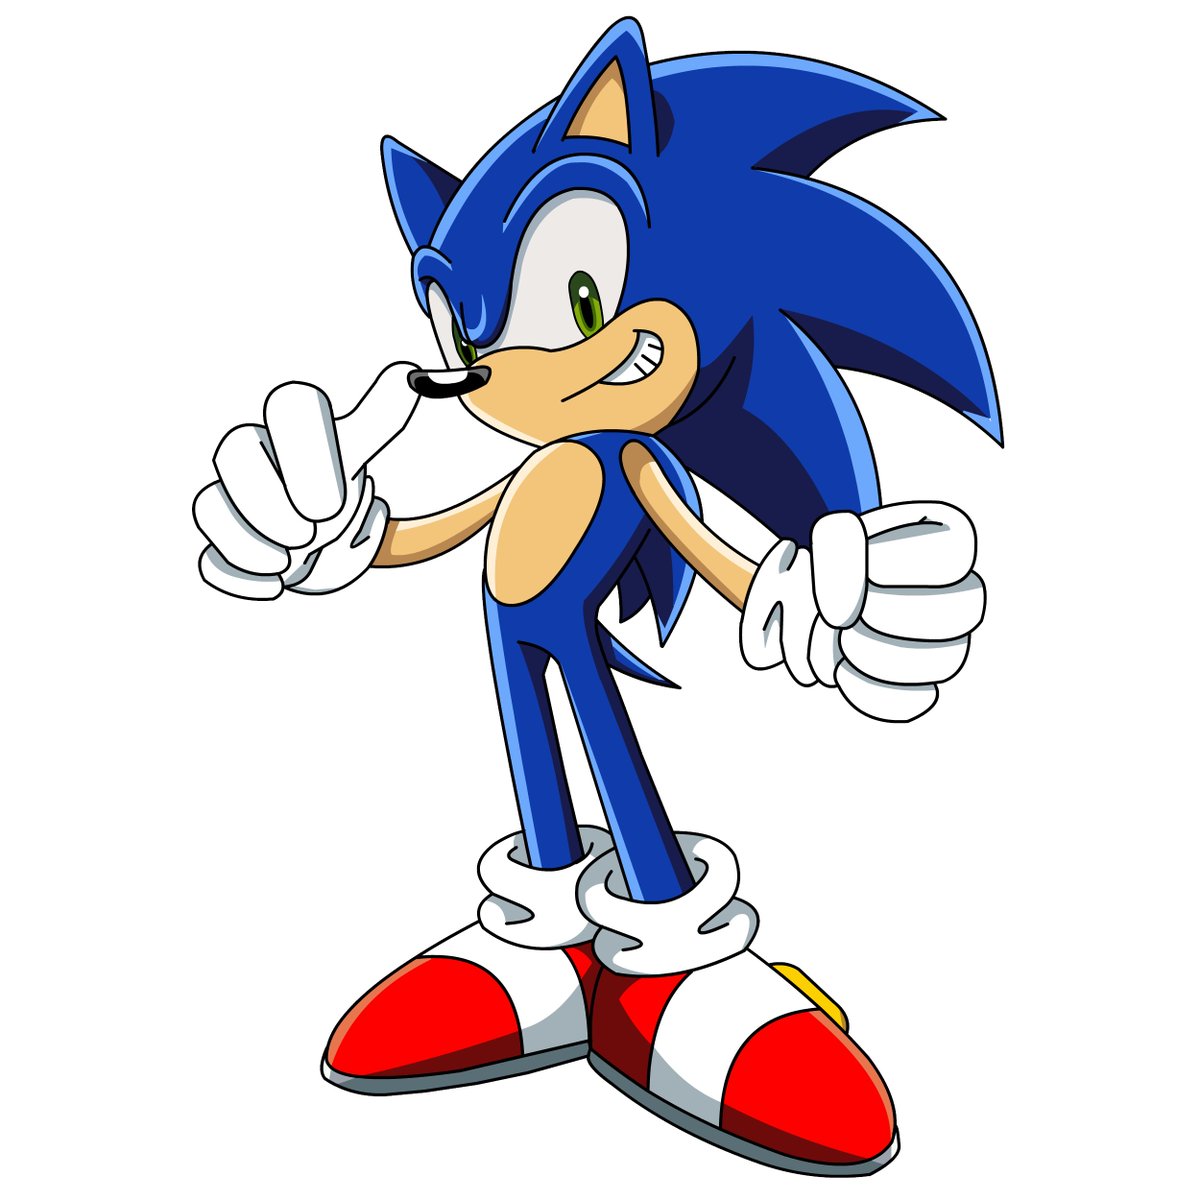 I tried redrawing this official render of Sonic using Sonic X styled shadin...